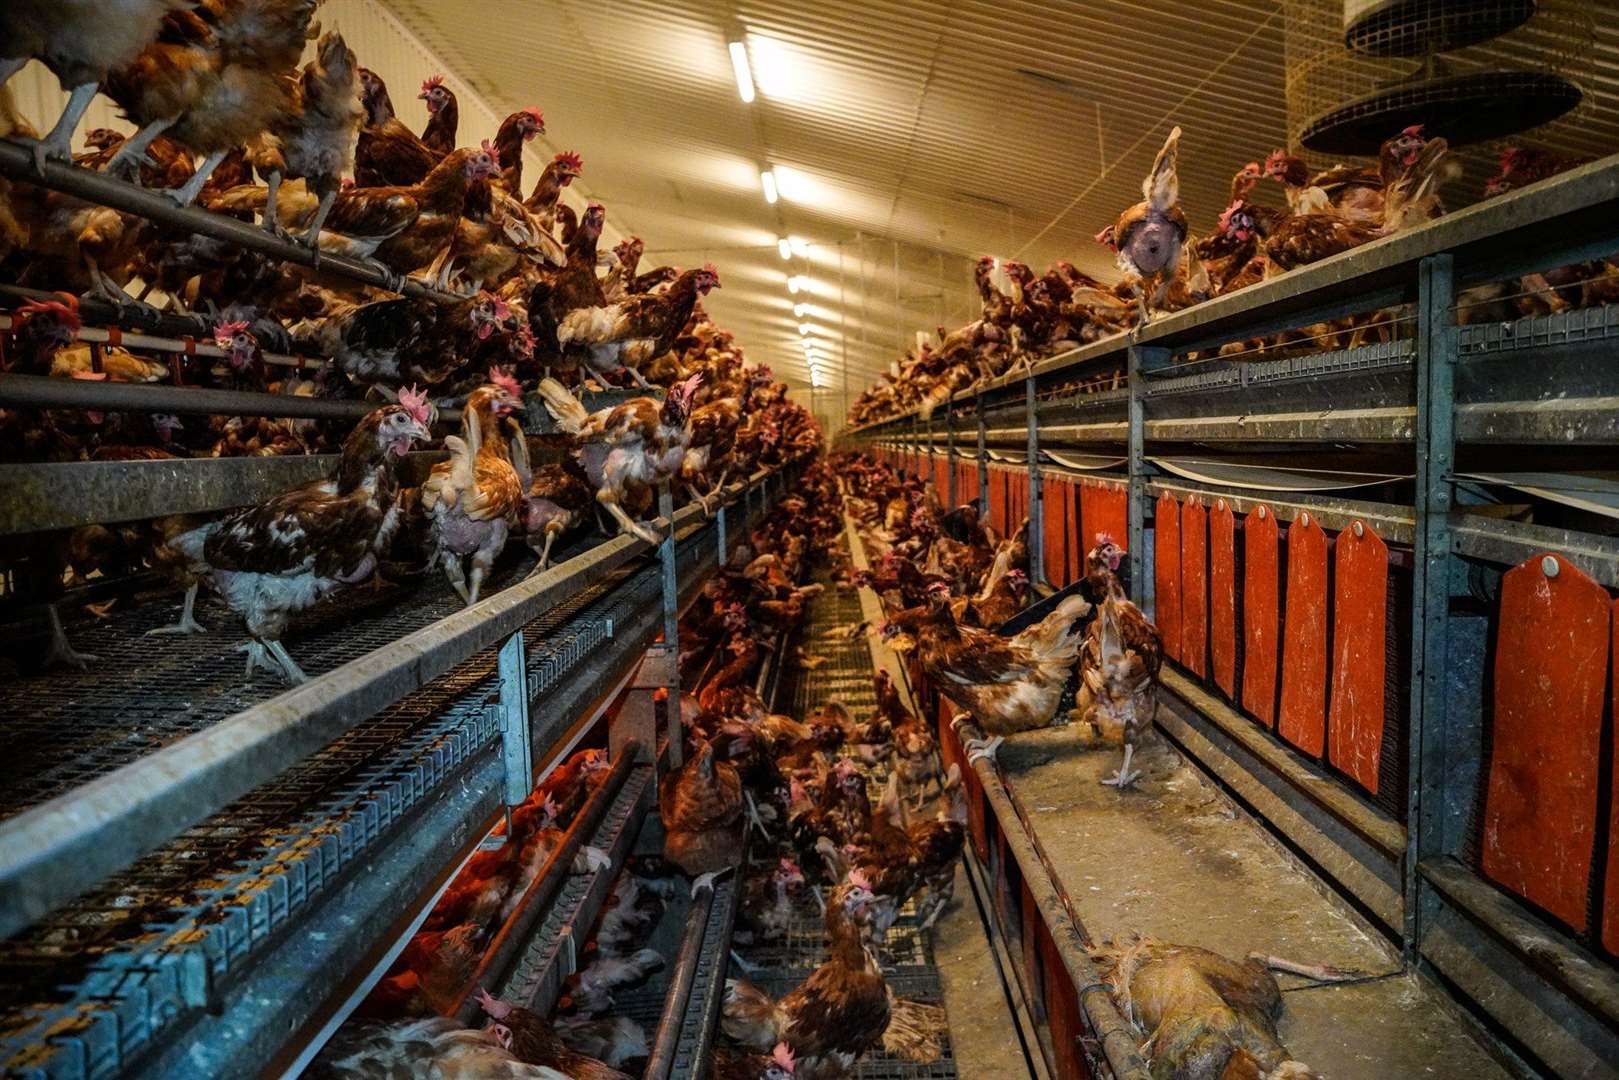 The appalling condition of some of the chickens found at Hoads Farm Picture: DxE